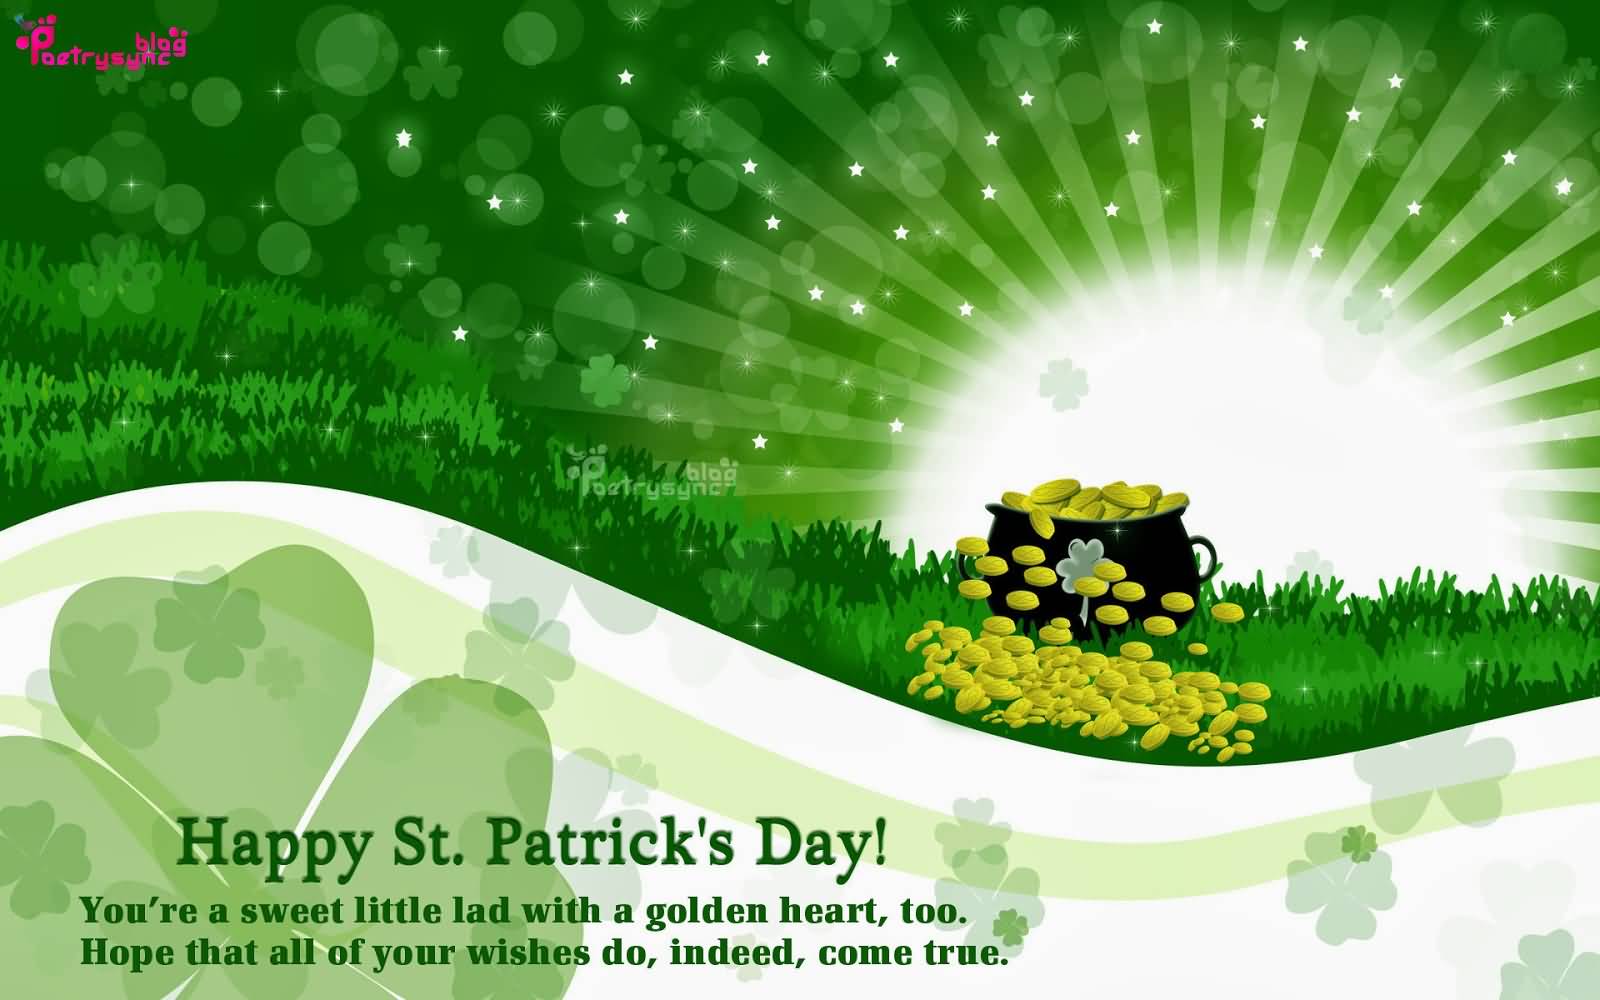 Happy Saint Patrick’s Day You’re A Sweet Little Lad With A Golden Heart